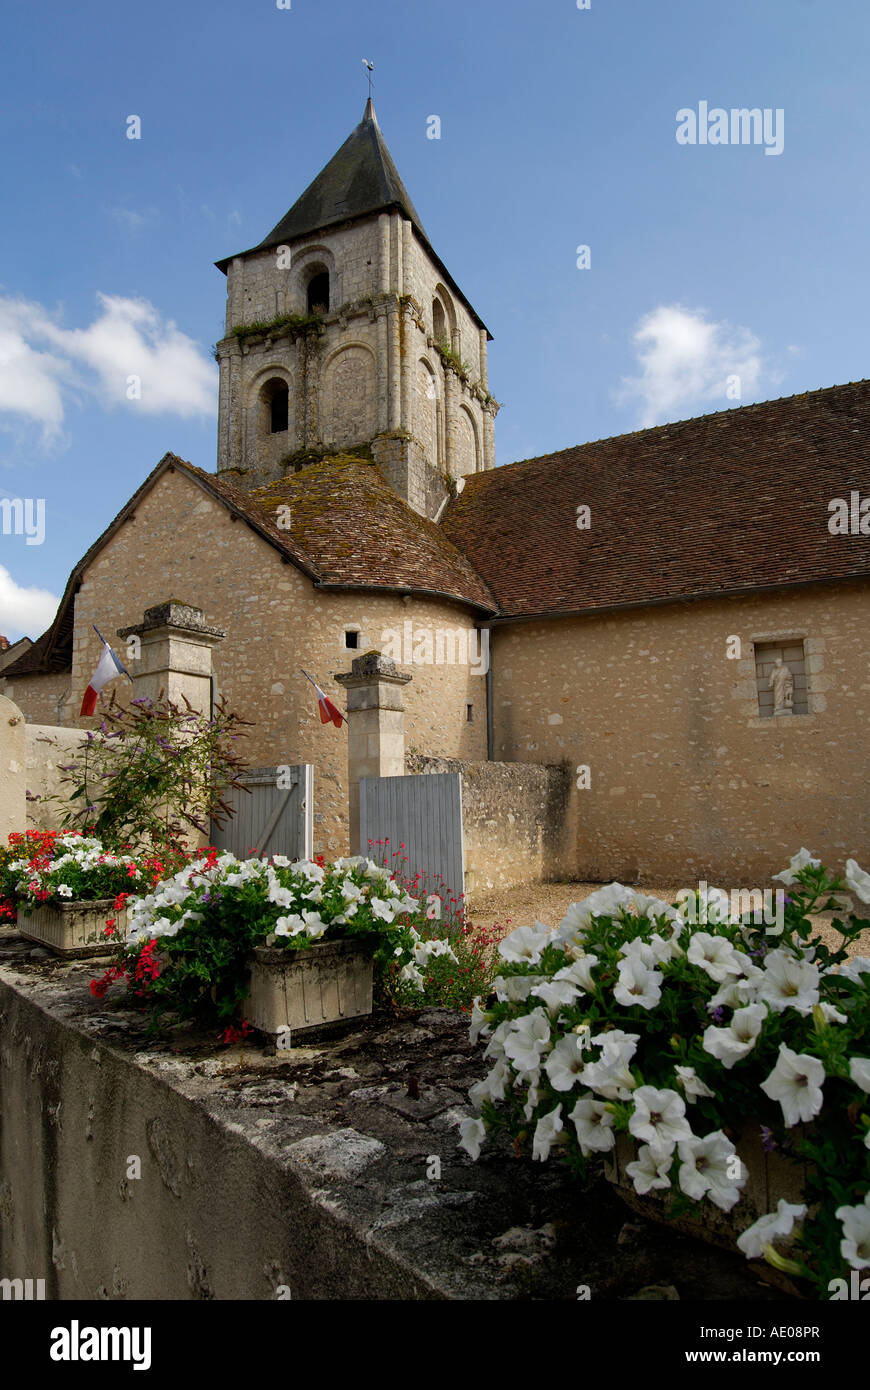 Church at Angles-sur-l'Anglin (86260), Vienne, France. Stock Photo